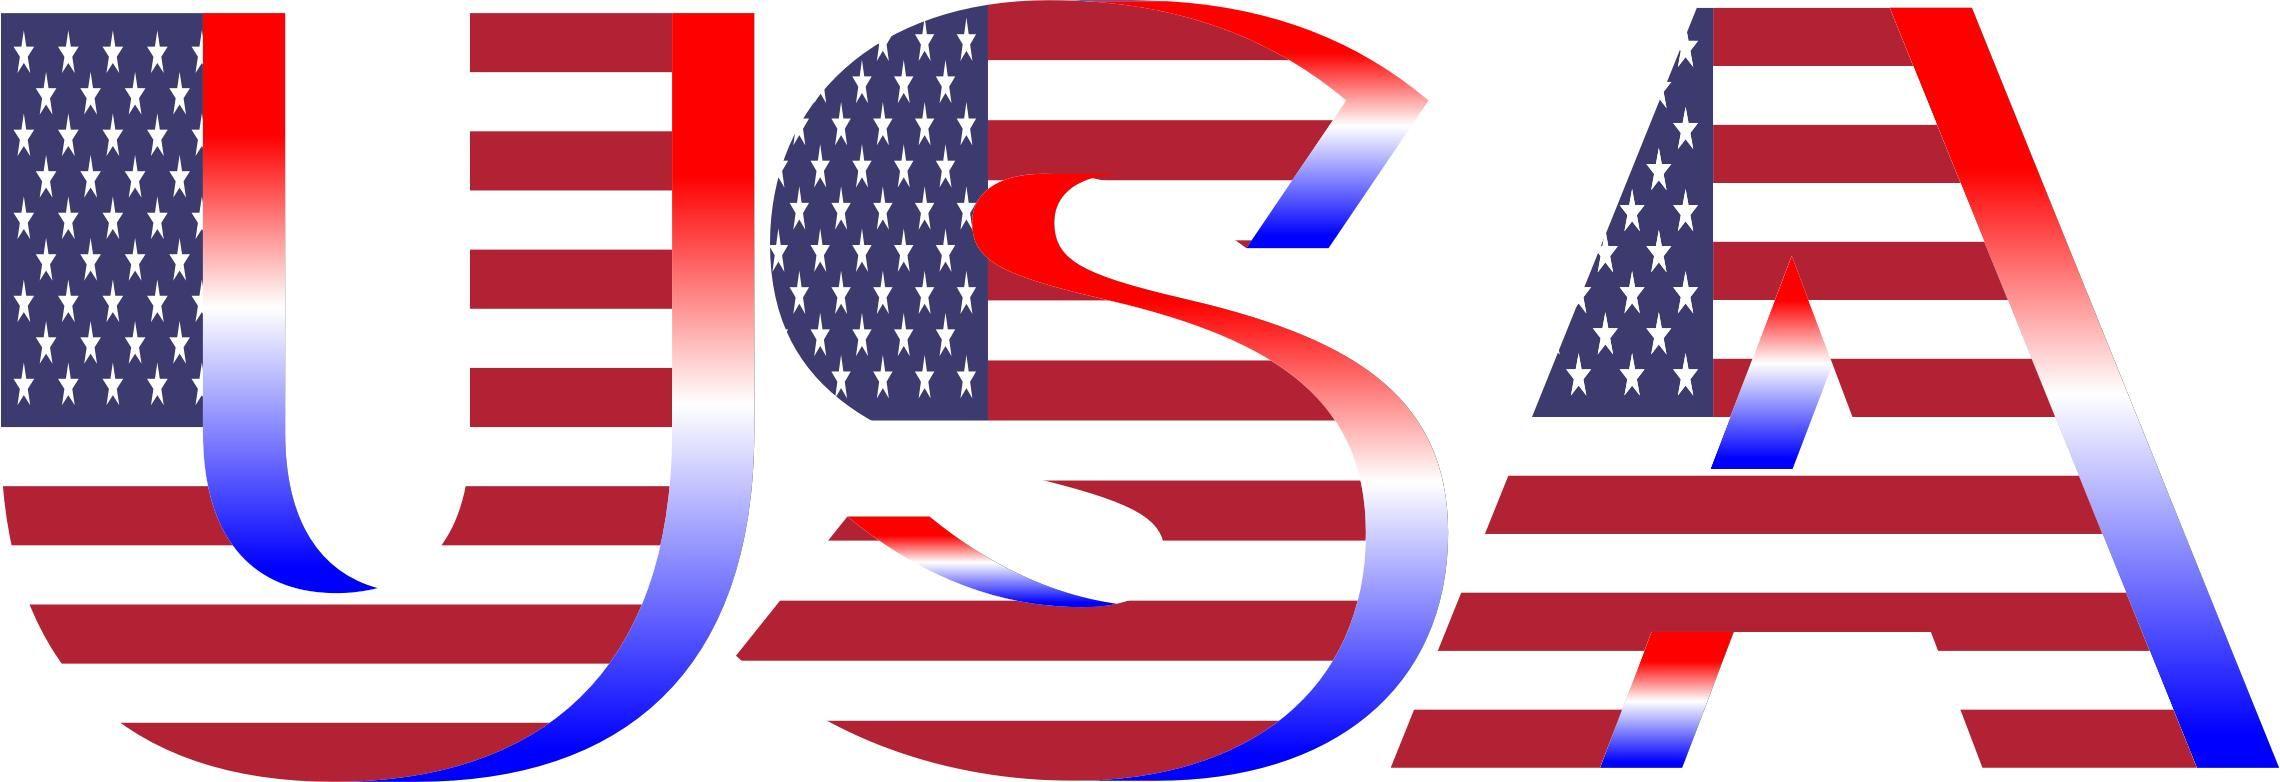 Red White and Blue Flag Logo - USA Flag Typography Red White And Blue No Background Icons PNG ...